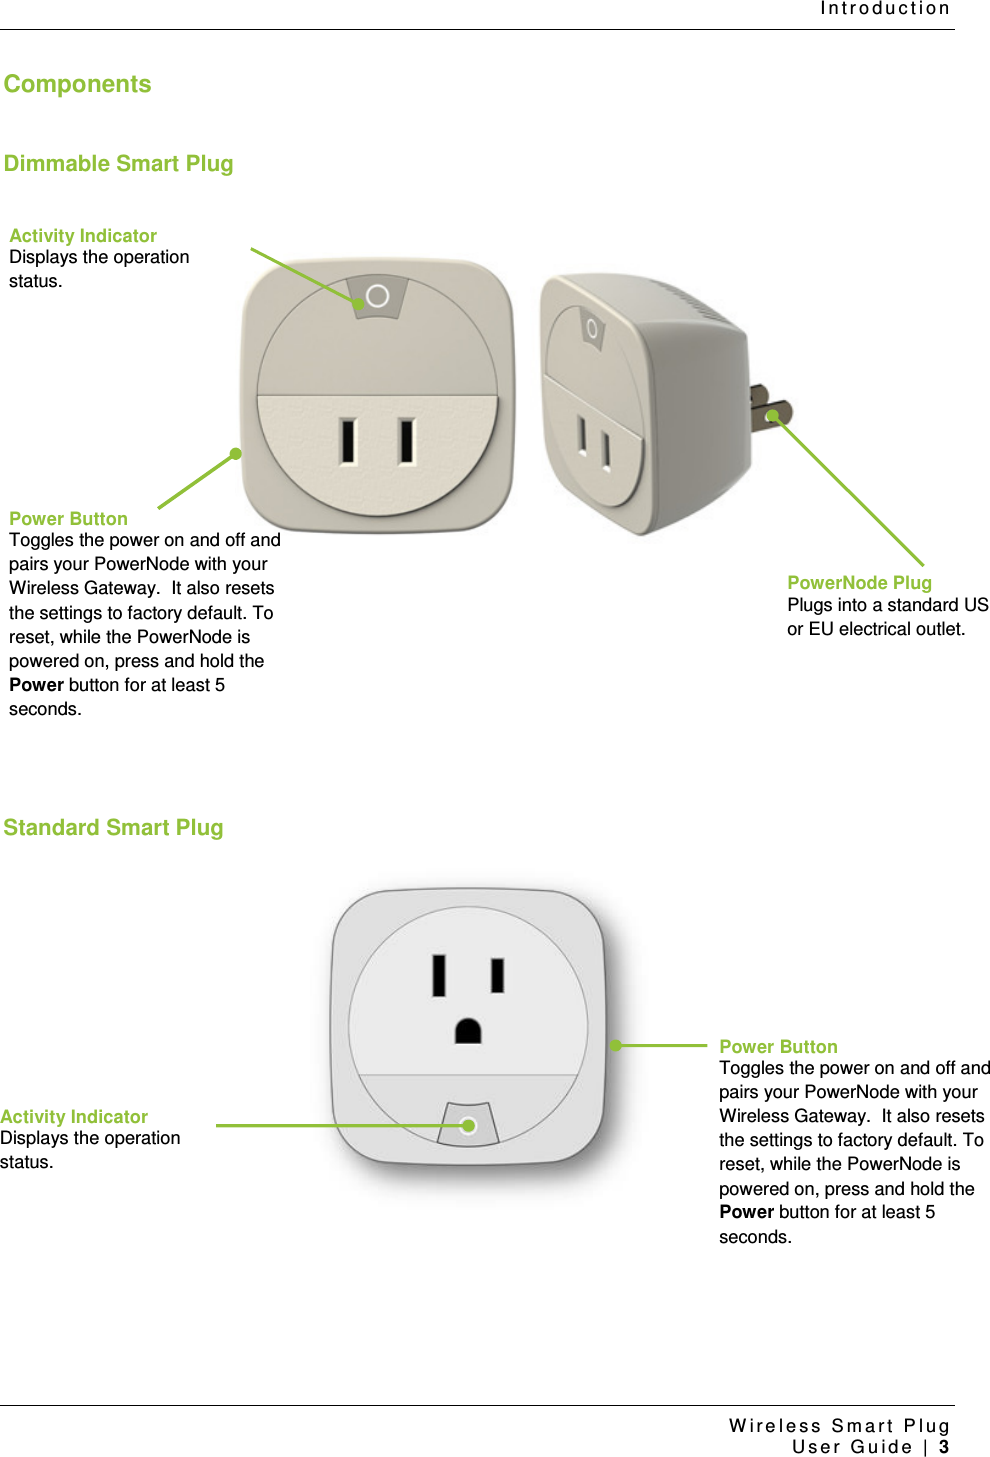 I n t r o d u c t i o n  W i r e l e s s   S m a r t   P l u g    U s e r   G u i d e   |   3  Components Dimmable Smart Plug          Standard Smart Plug    Activity Indicator  Displays the operation status.  PowerNode Plug Plugs into a standard US or EU electrical outlet.      Power Button Toggles the power on and off and pairs your PowerNode with your Wireless Gateway.  It also resets the settings to factory default. To reset, while the PowerNode is powered on, press and hold the Power button for at least 5 seconds. Activity Indicator  Displays the operation status.  Power Button Toggles the power on and off and pairs your PowerNode with your Wireless Gateway.  It also resets the settings to factory default. To reset, while the PowerNode is powered on, press and hold the Power button for at least 5 seconds.  